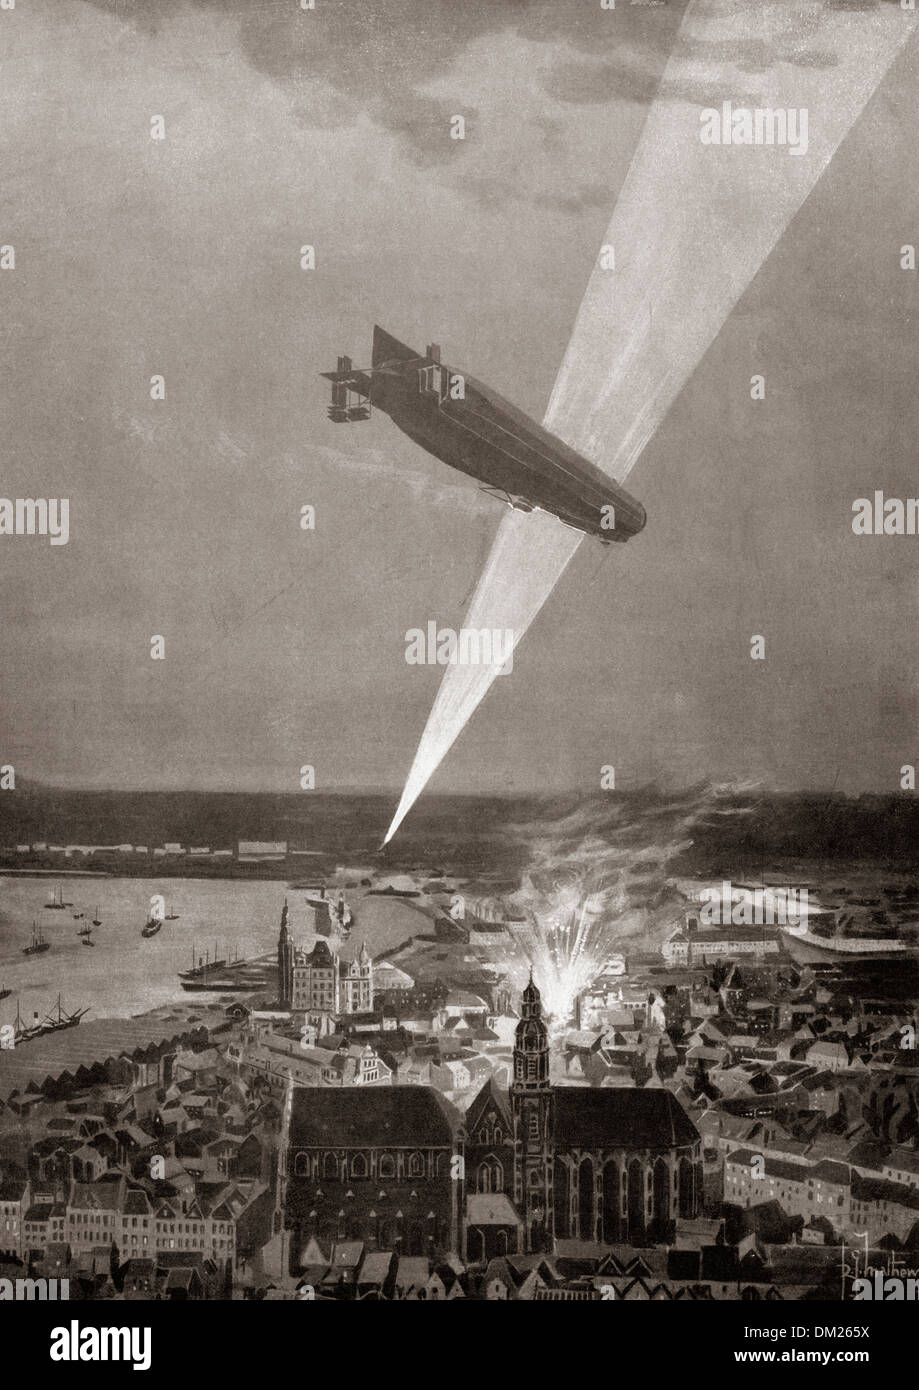 The Zeppelin bombardment of Antwerp, Belgium, August 1914, in defiance of the Hague Convention. Stock Photo